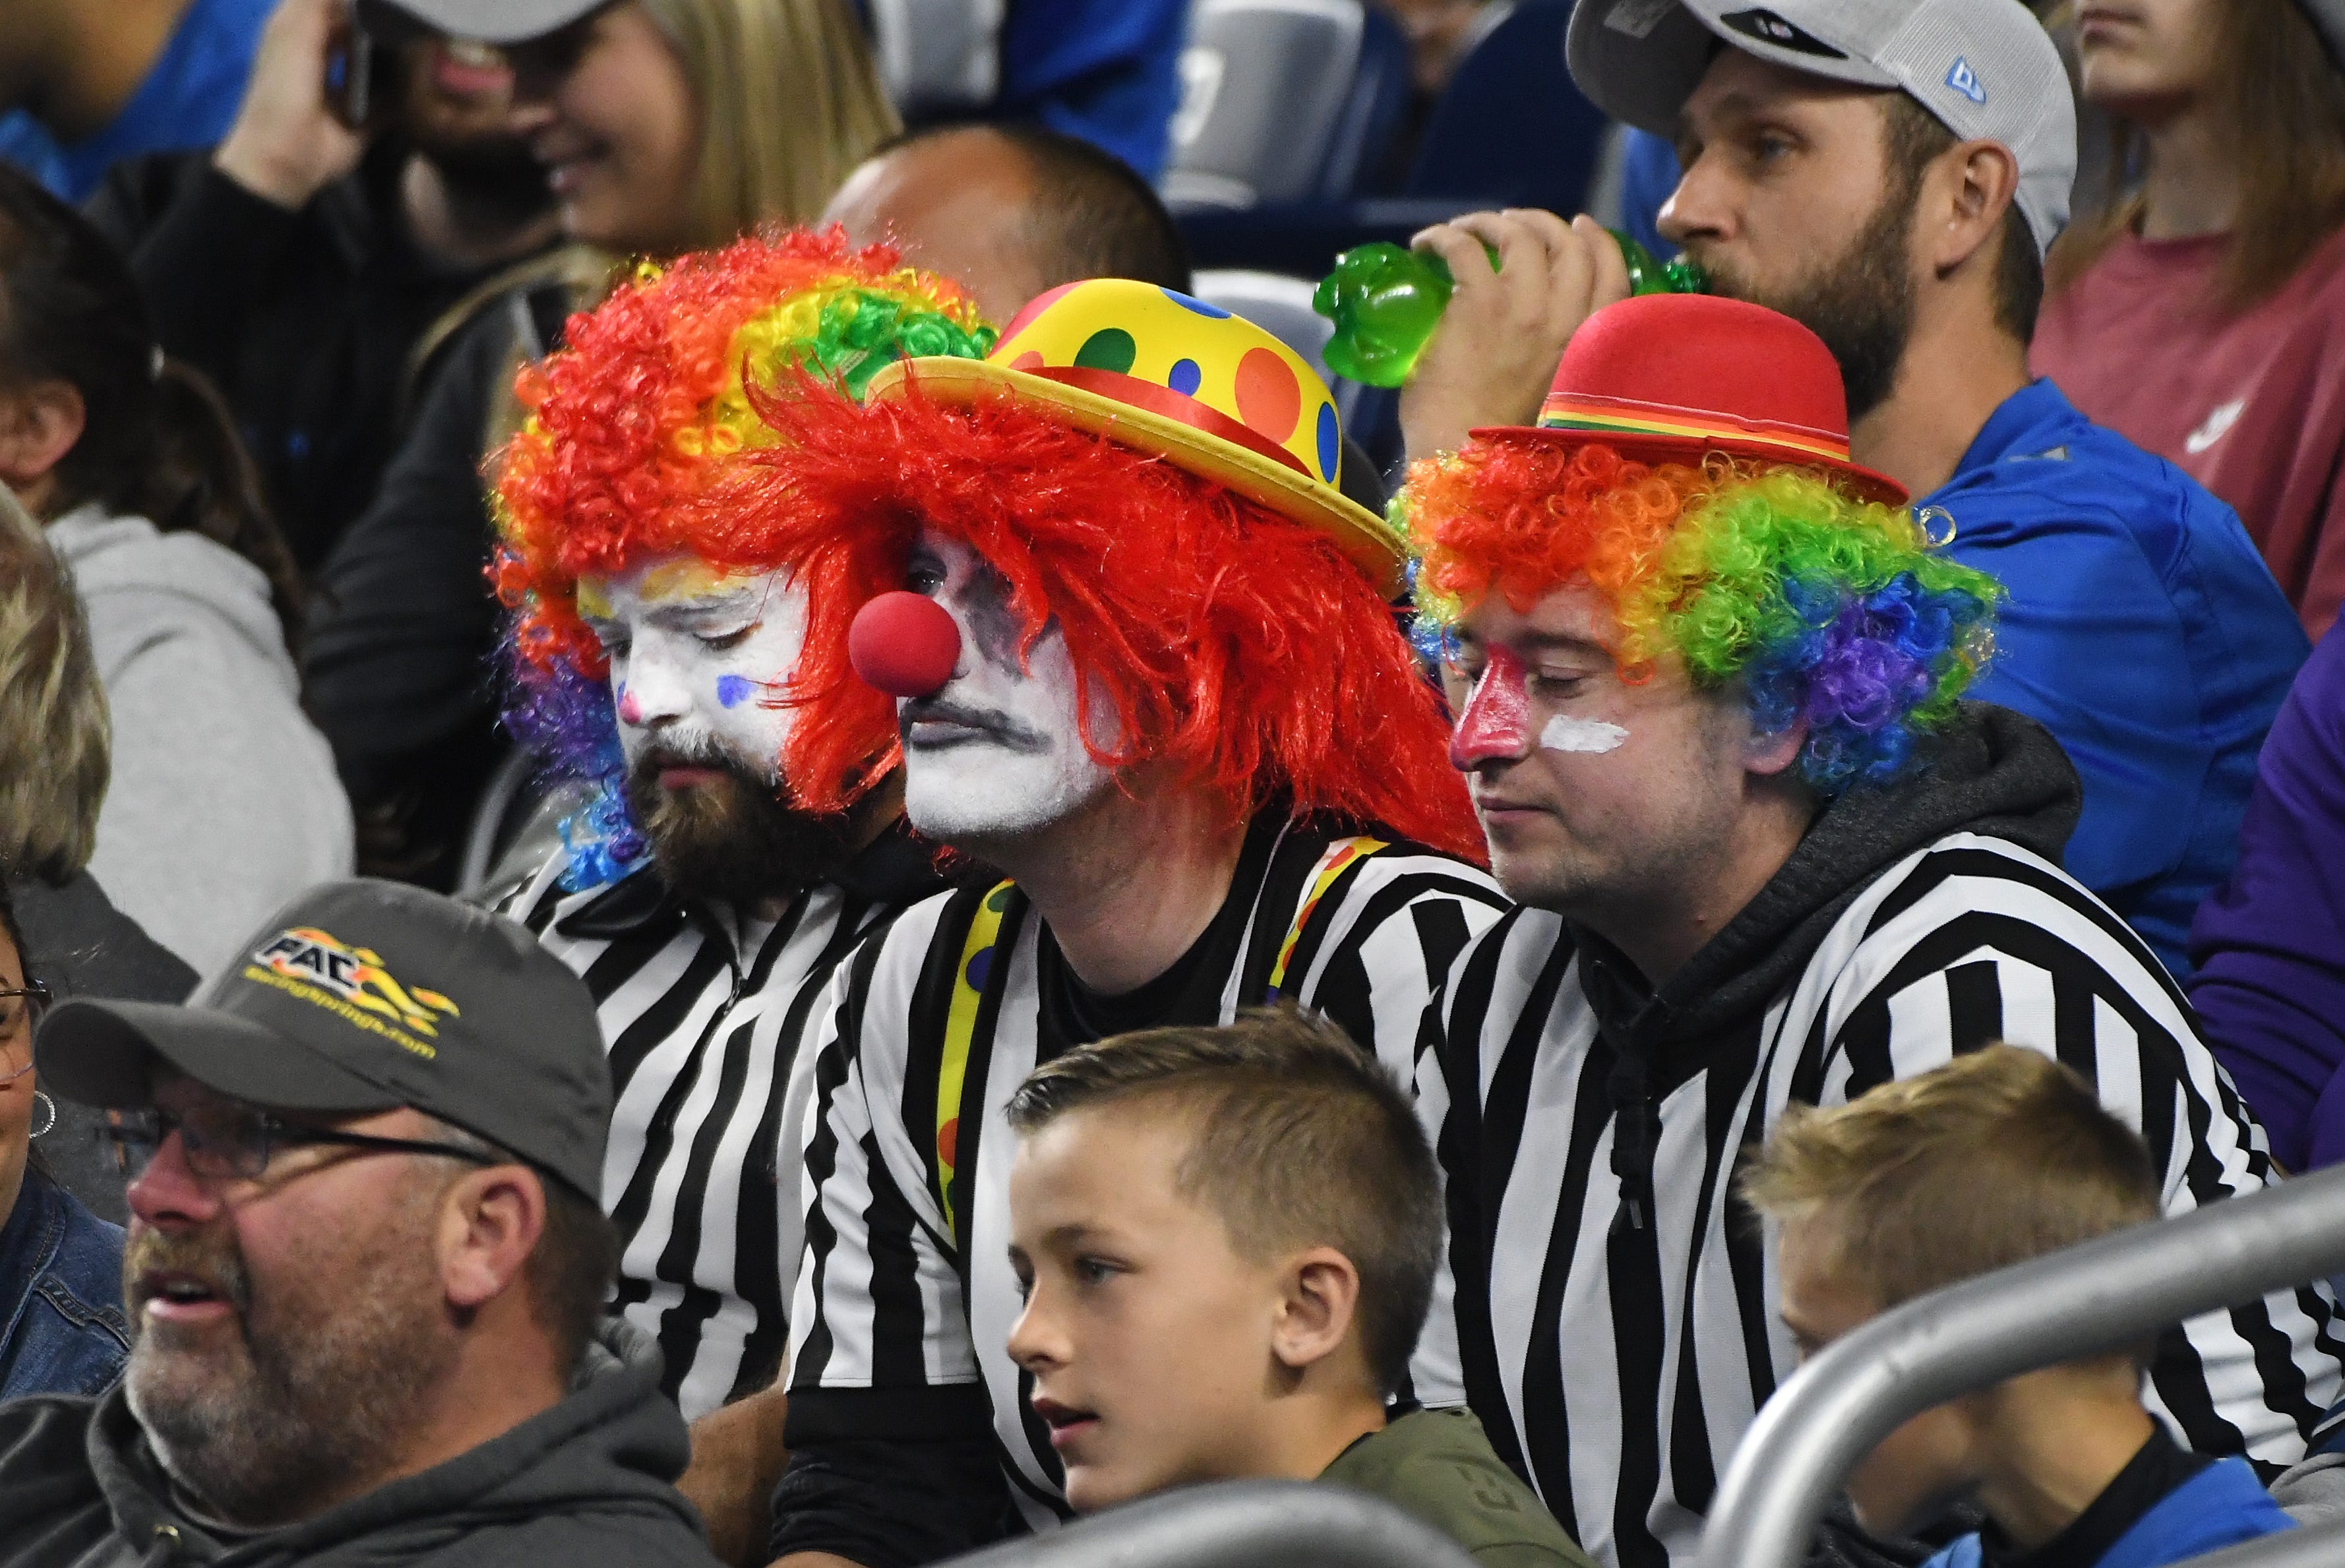 No humor in this crowd, as Lions fans dressed in referee clown outfits sit quietly during the 42-30 loss to the Minnesota Vikings at Ford Field in Detroit on Sunday, Oct. 20, 2019